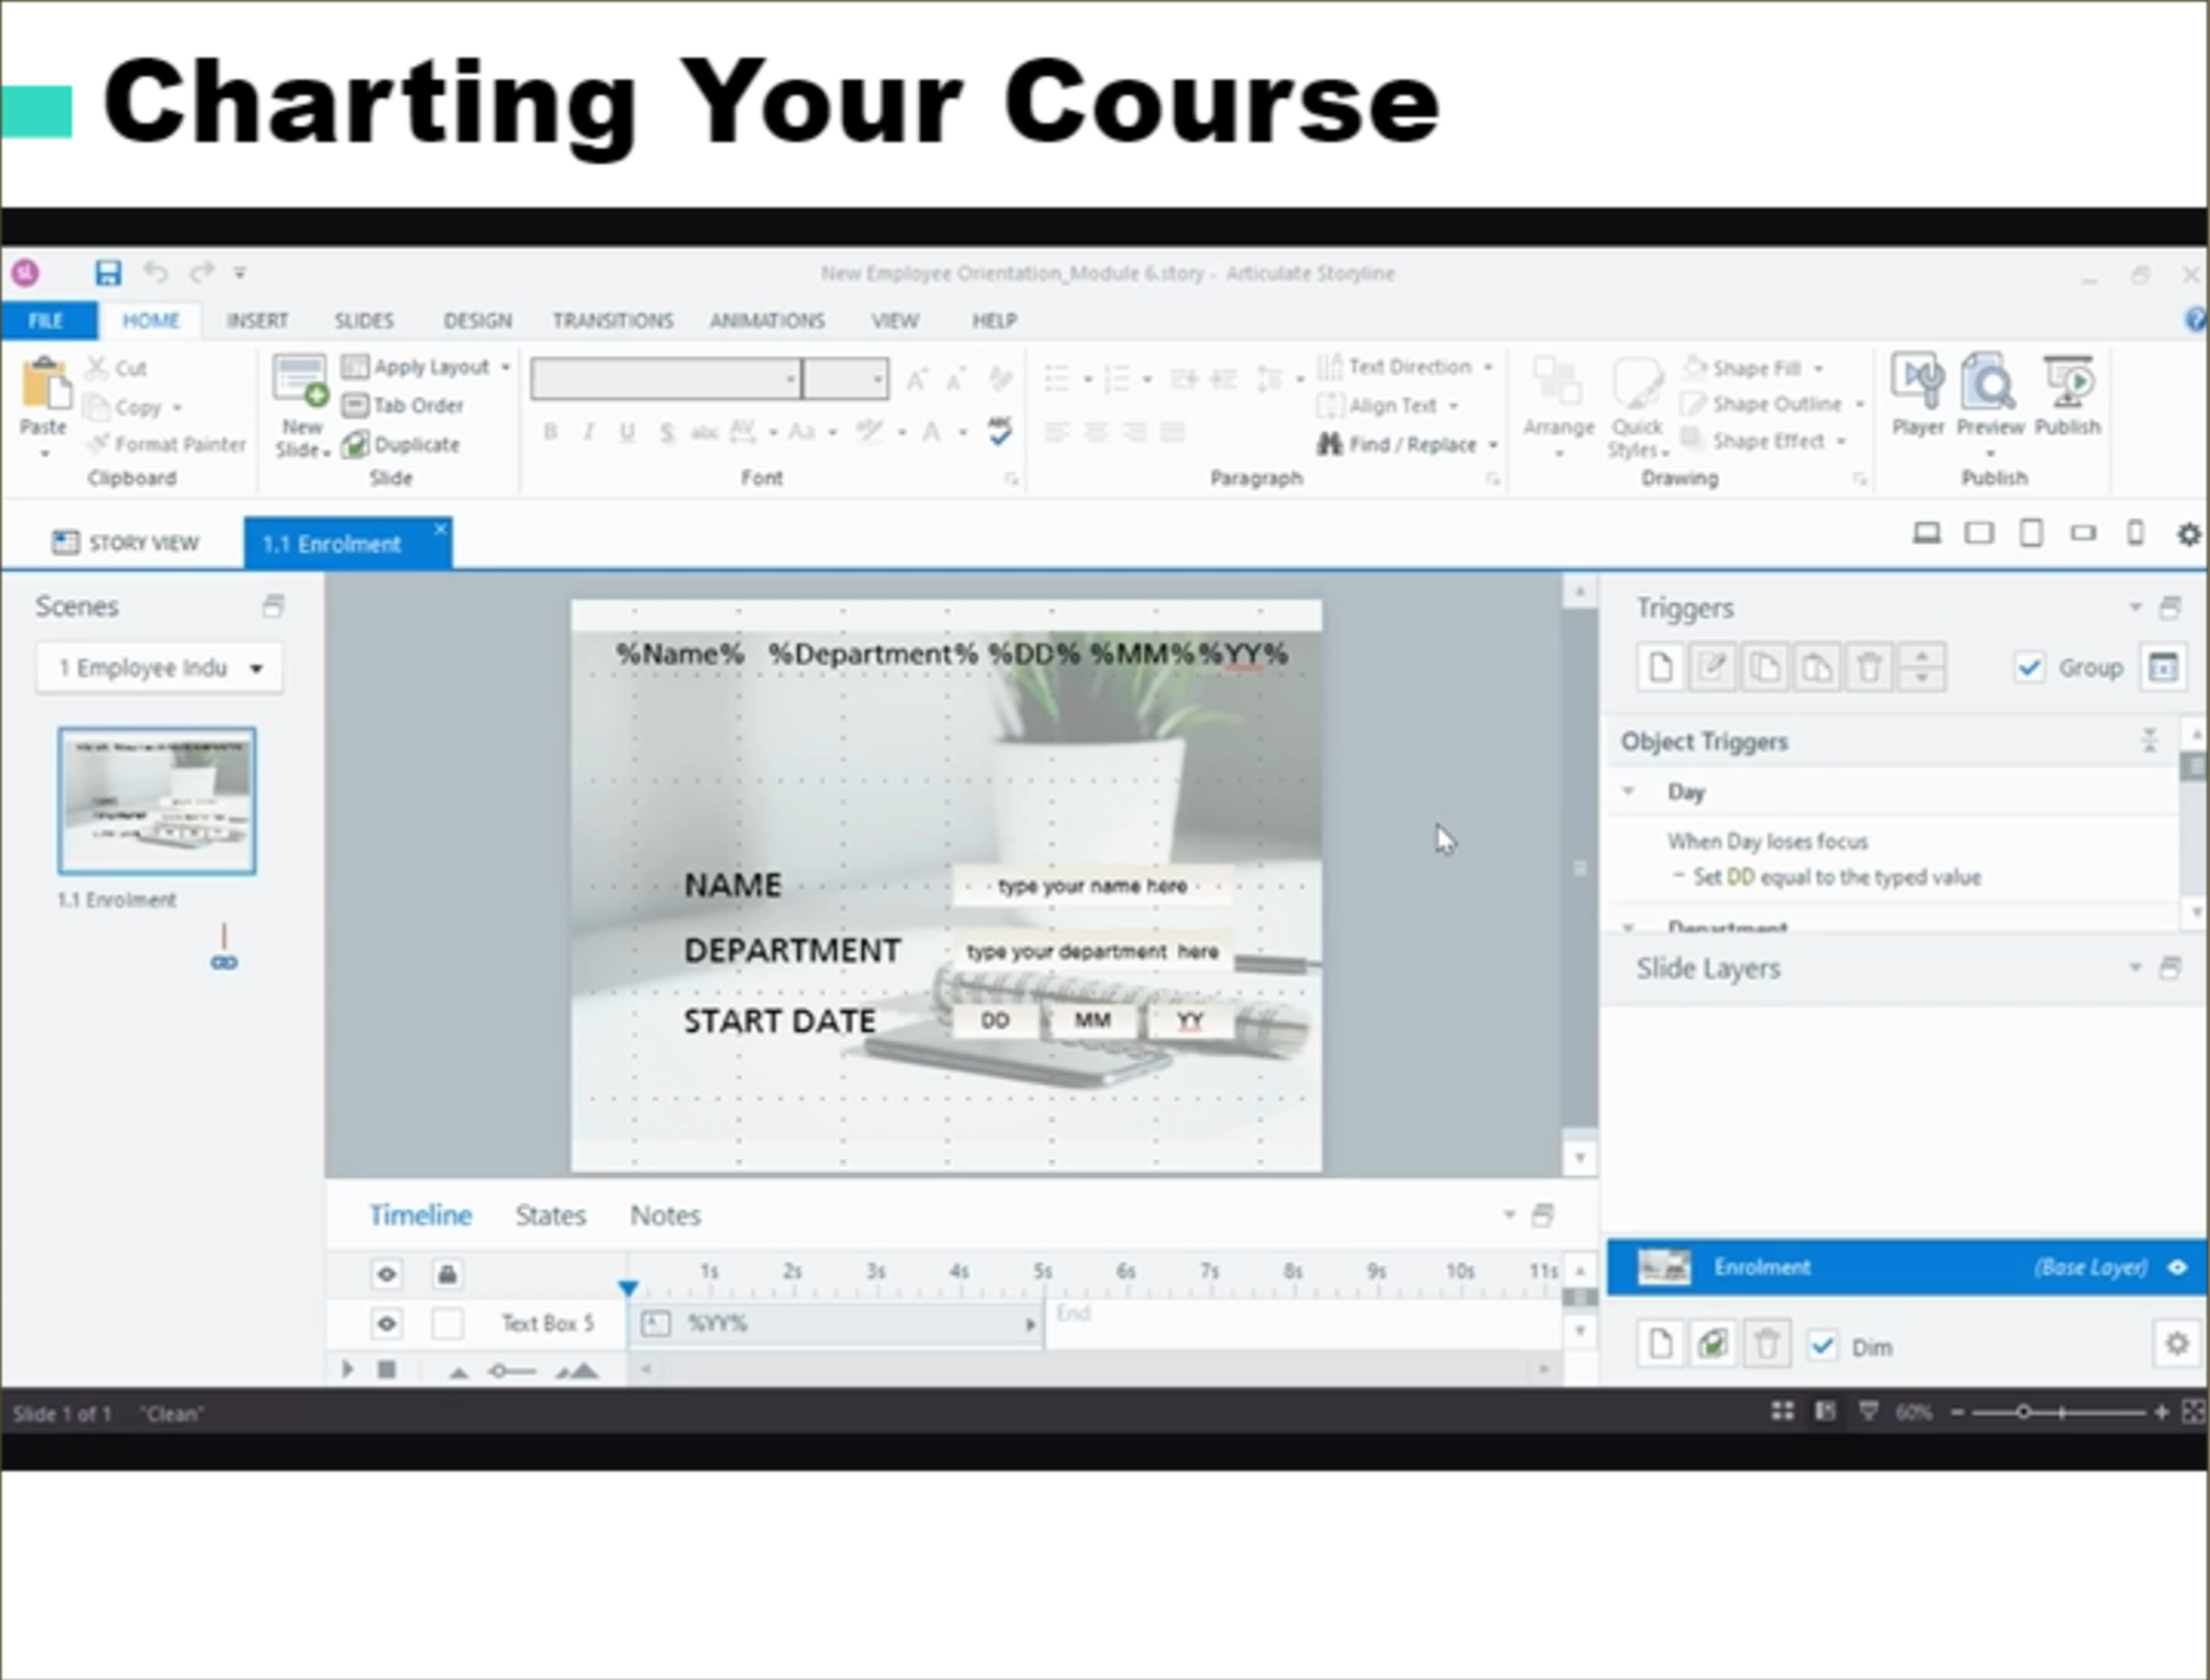 Creating Effective eLearning Content with Articulate, Singapore elarning online course